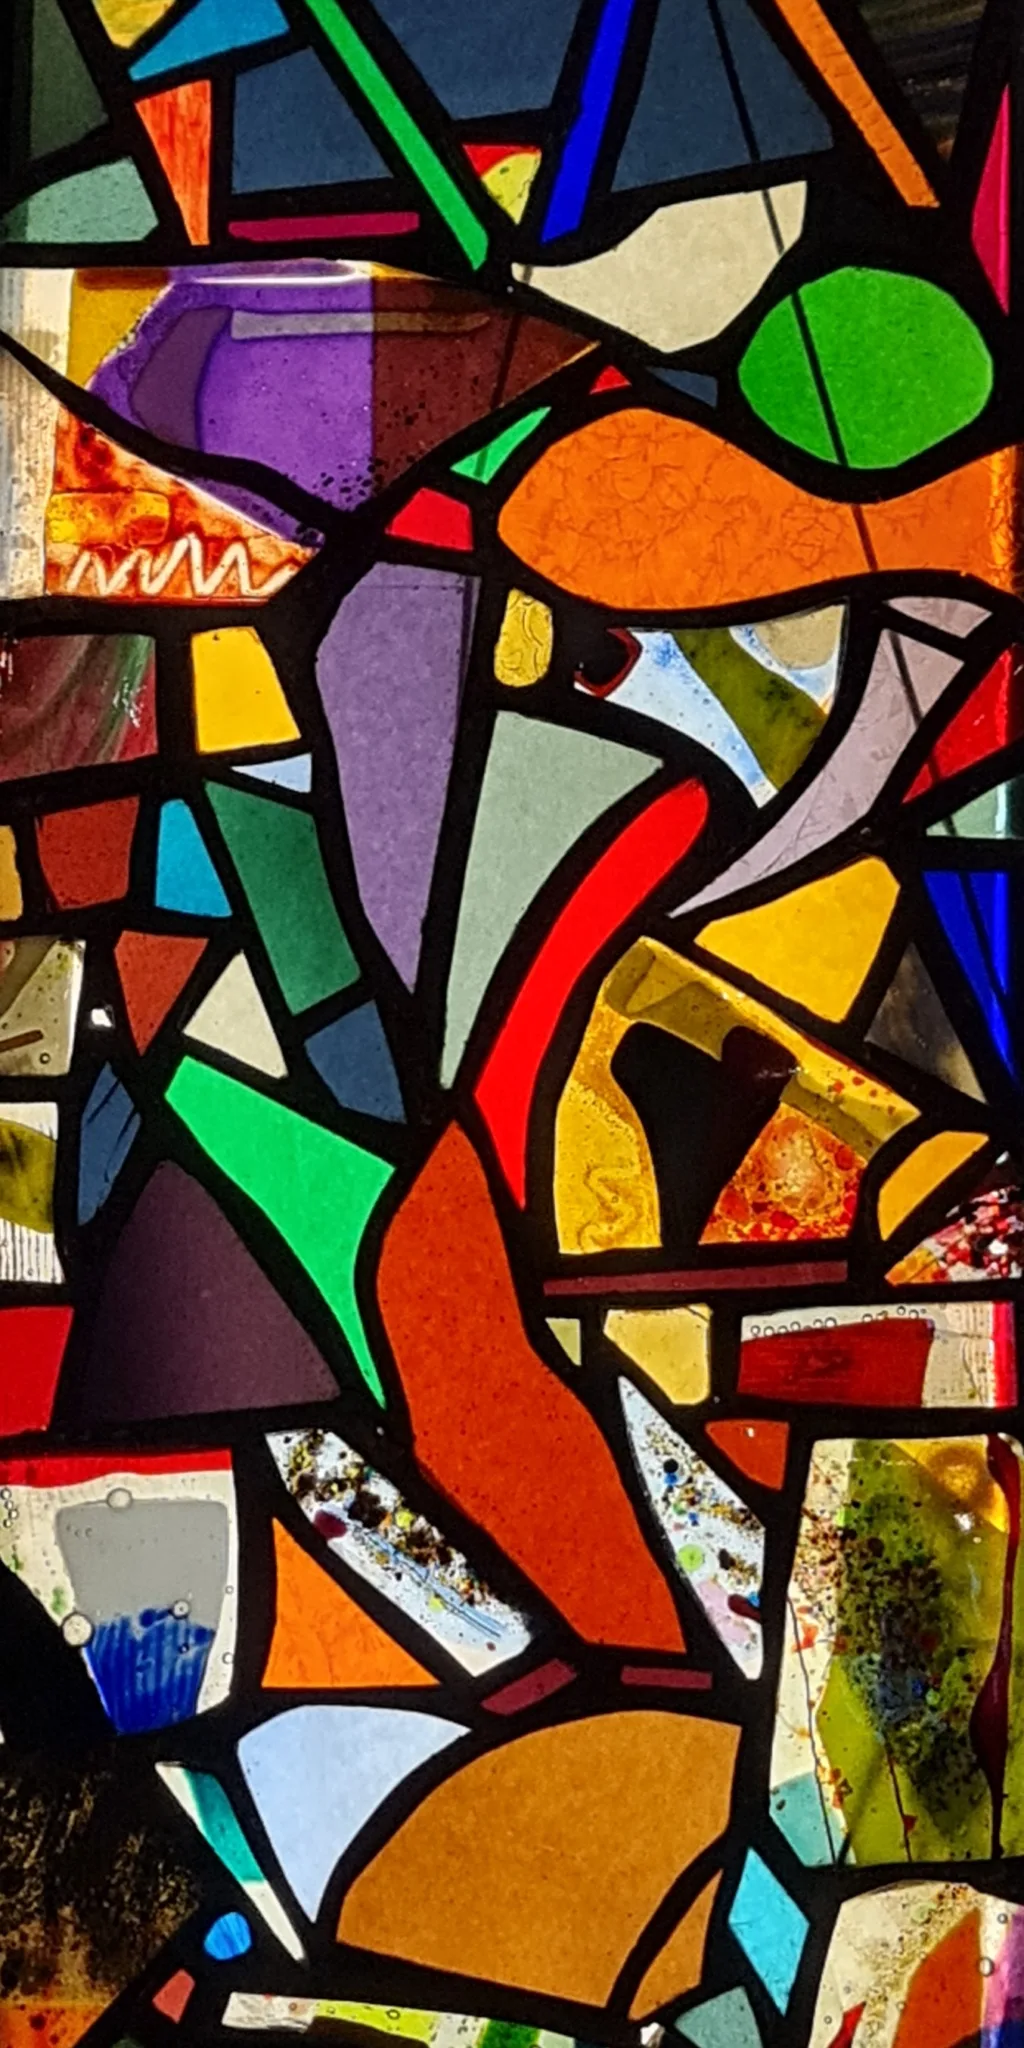 A colorful modern stained glass window.